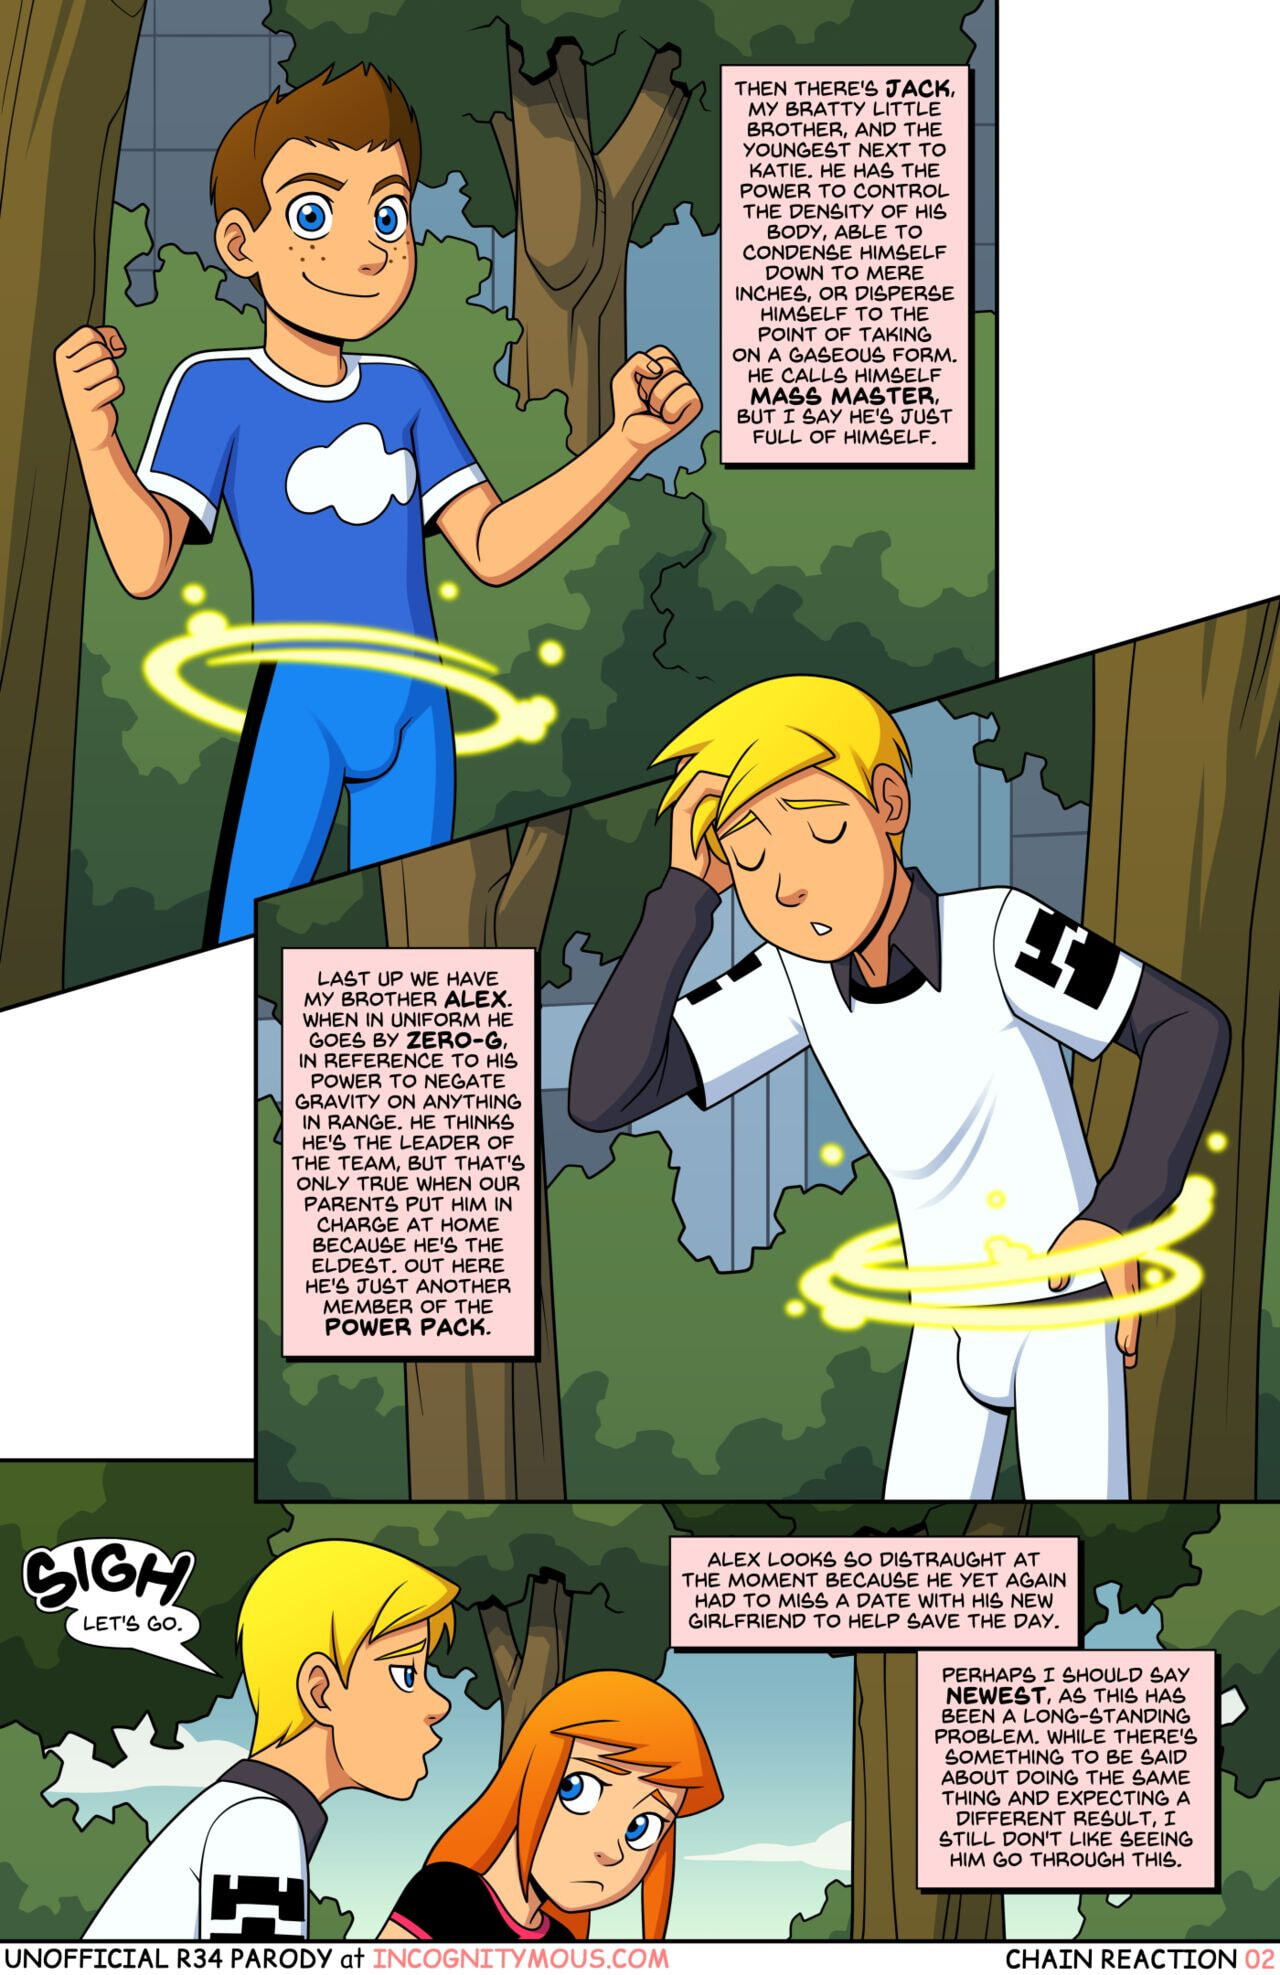 Power Pack - Chain Reaction - Page 3